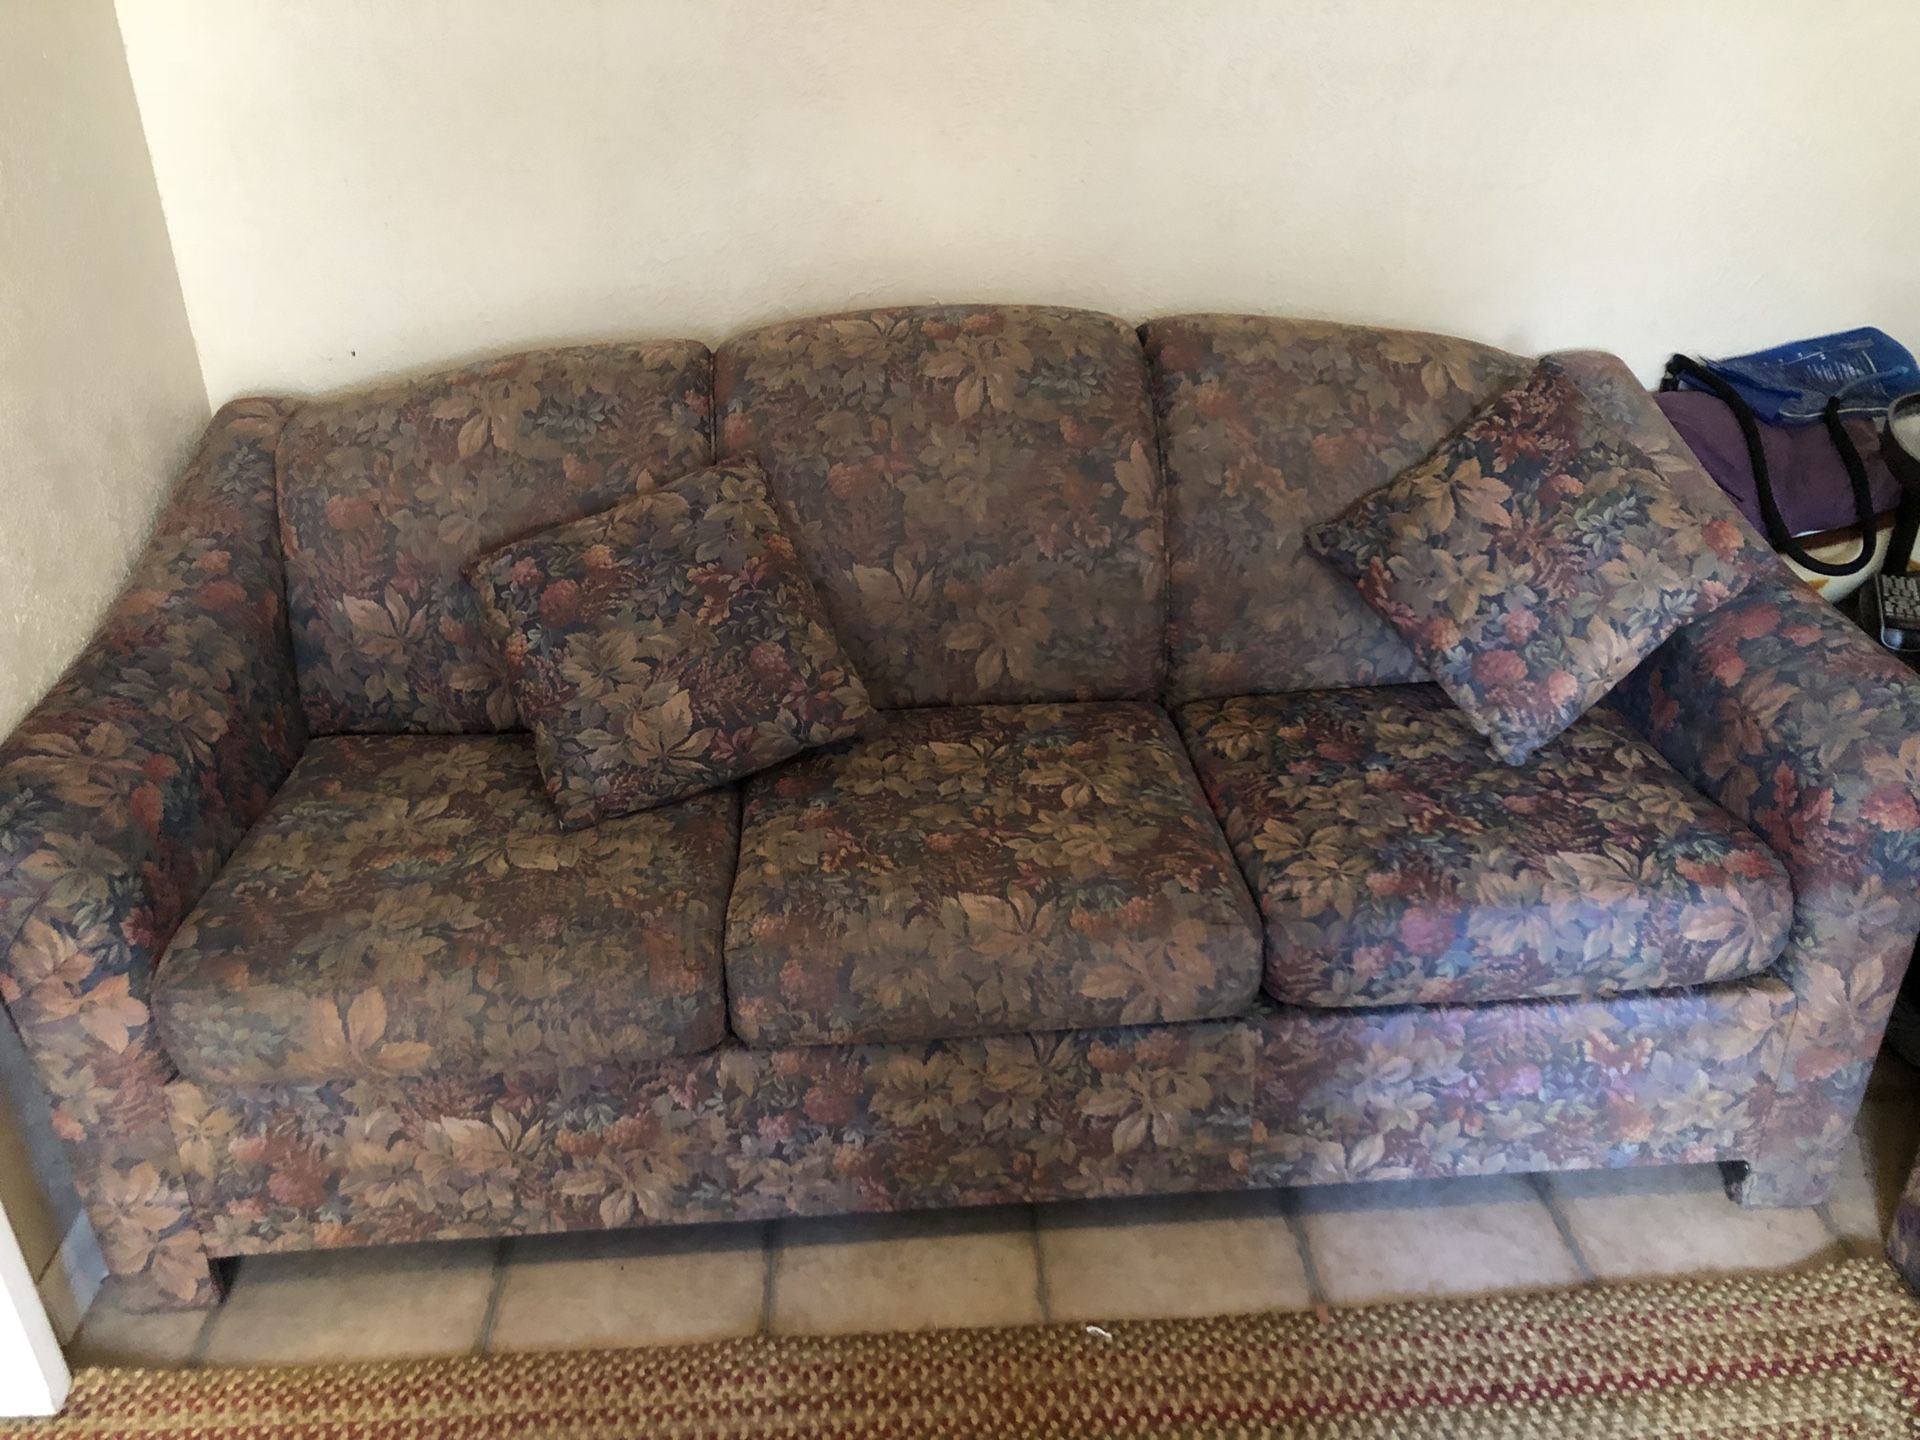 Sofa bed, love seat, corner chair, and ottoman